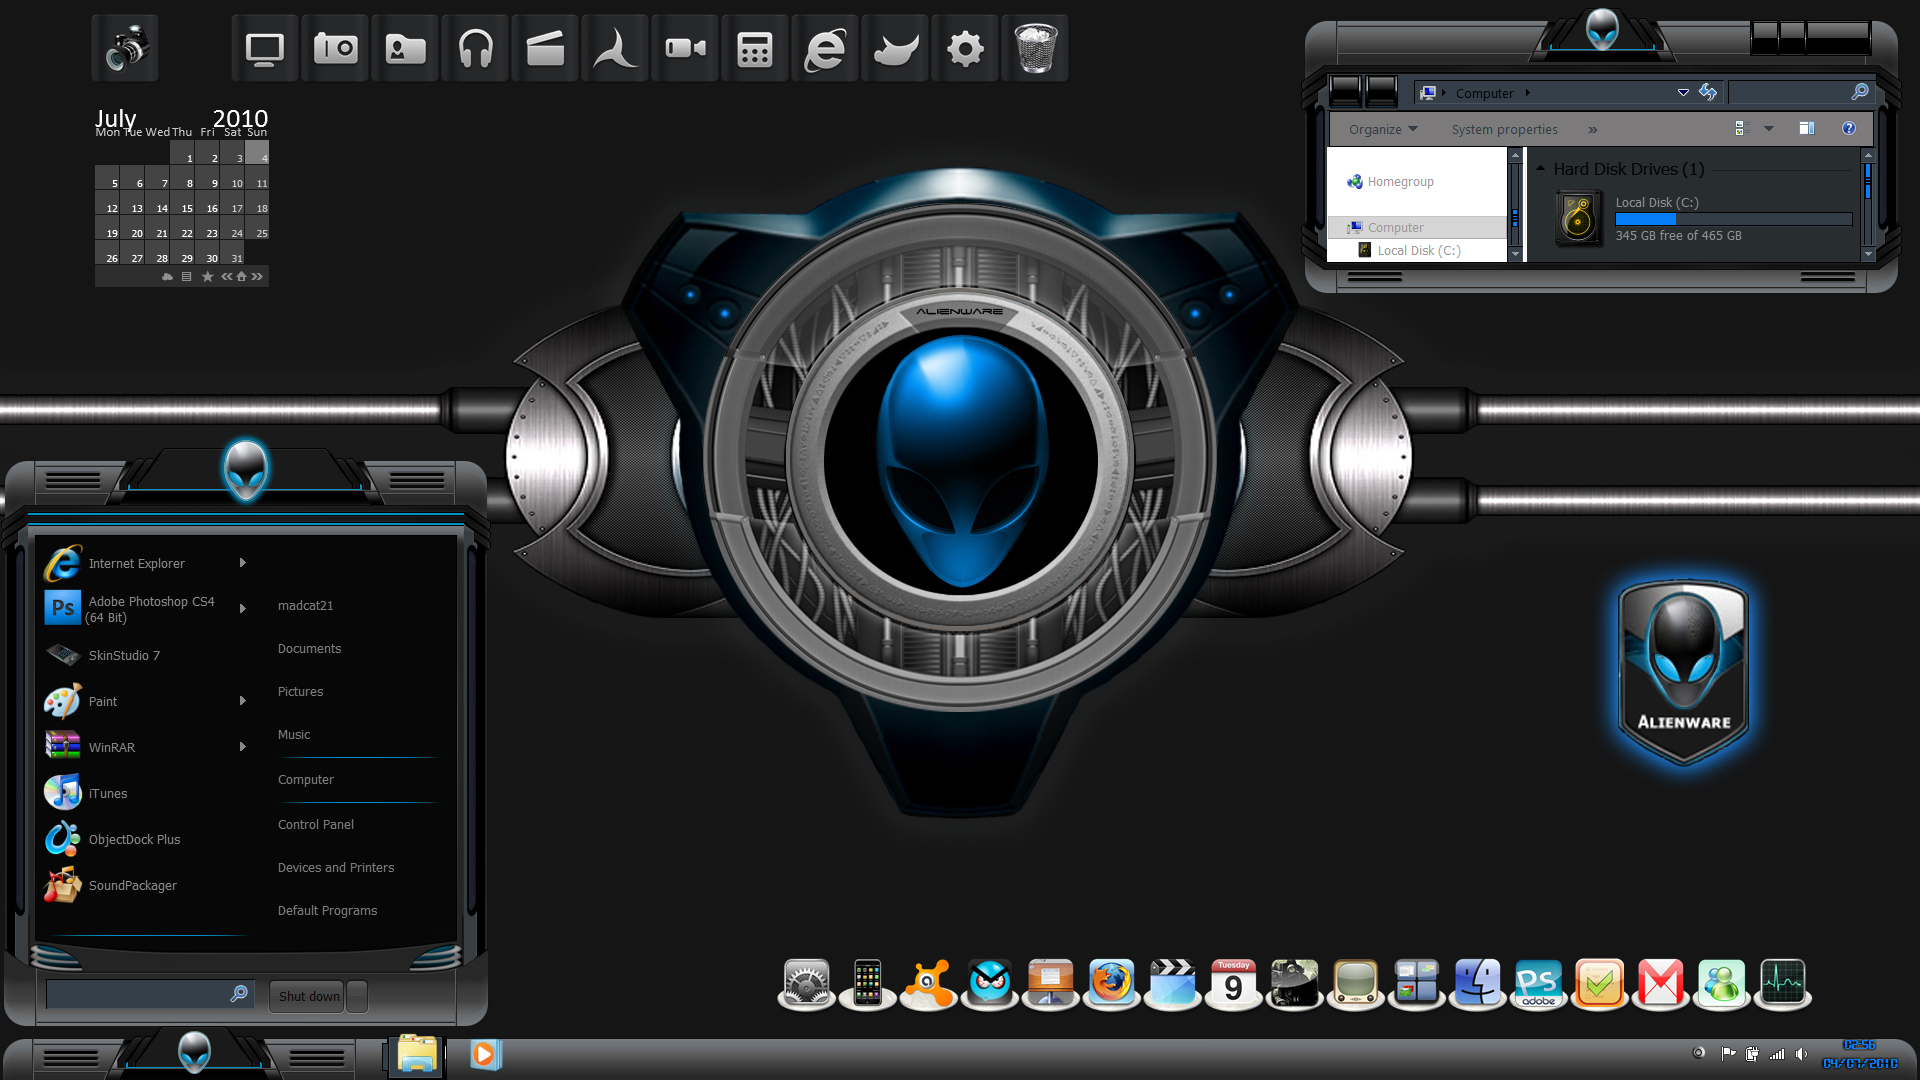  alienware is one of the most downloaded windows blind for windows 7 1920x1080